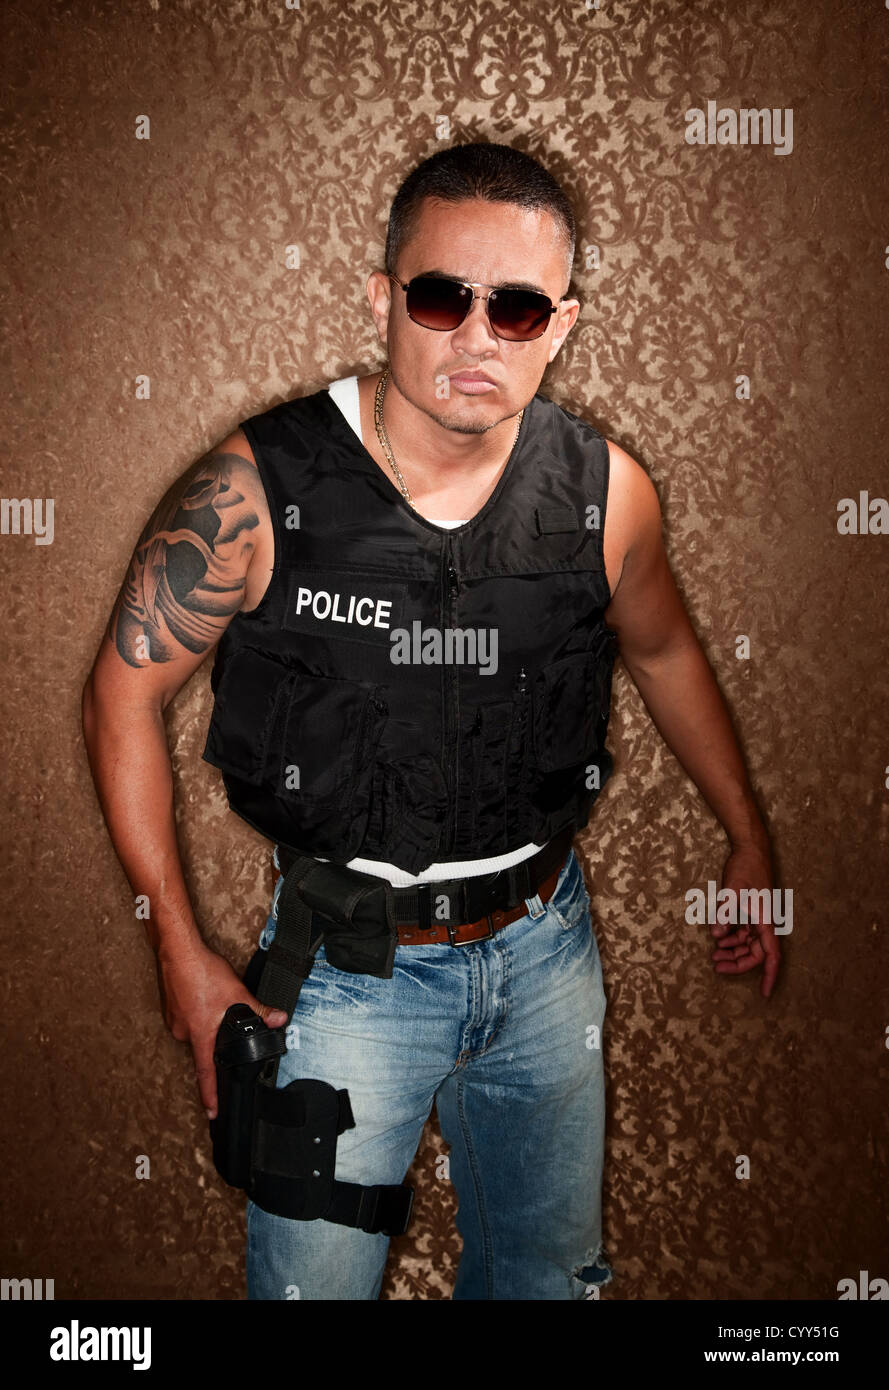 Police Officer with Gun Strapped to His Thigh Stock Photo